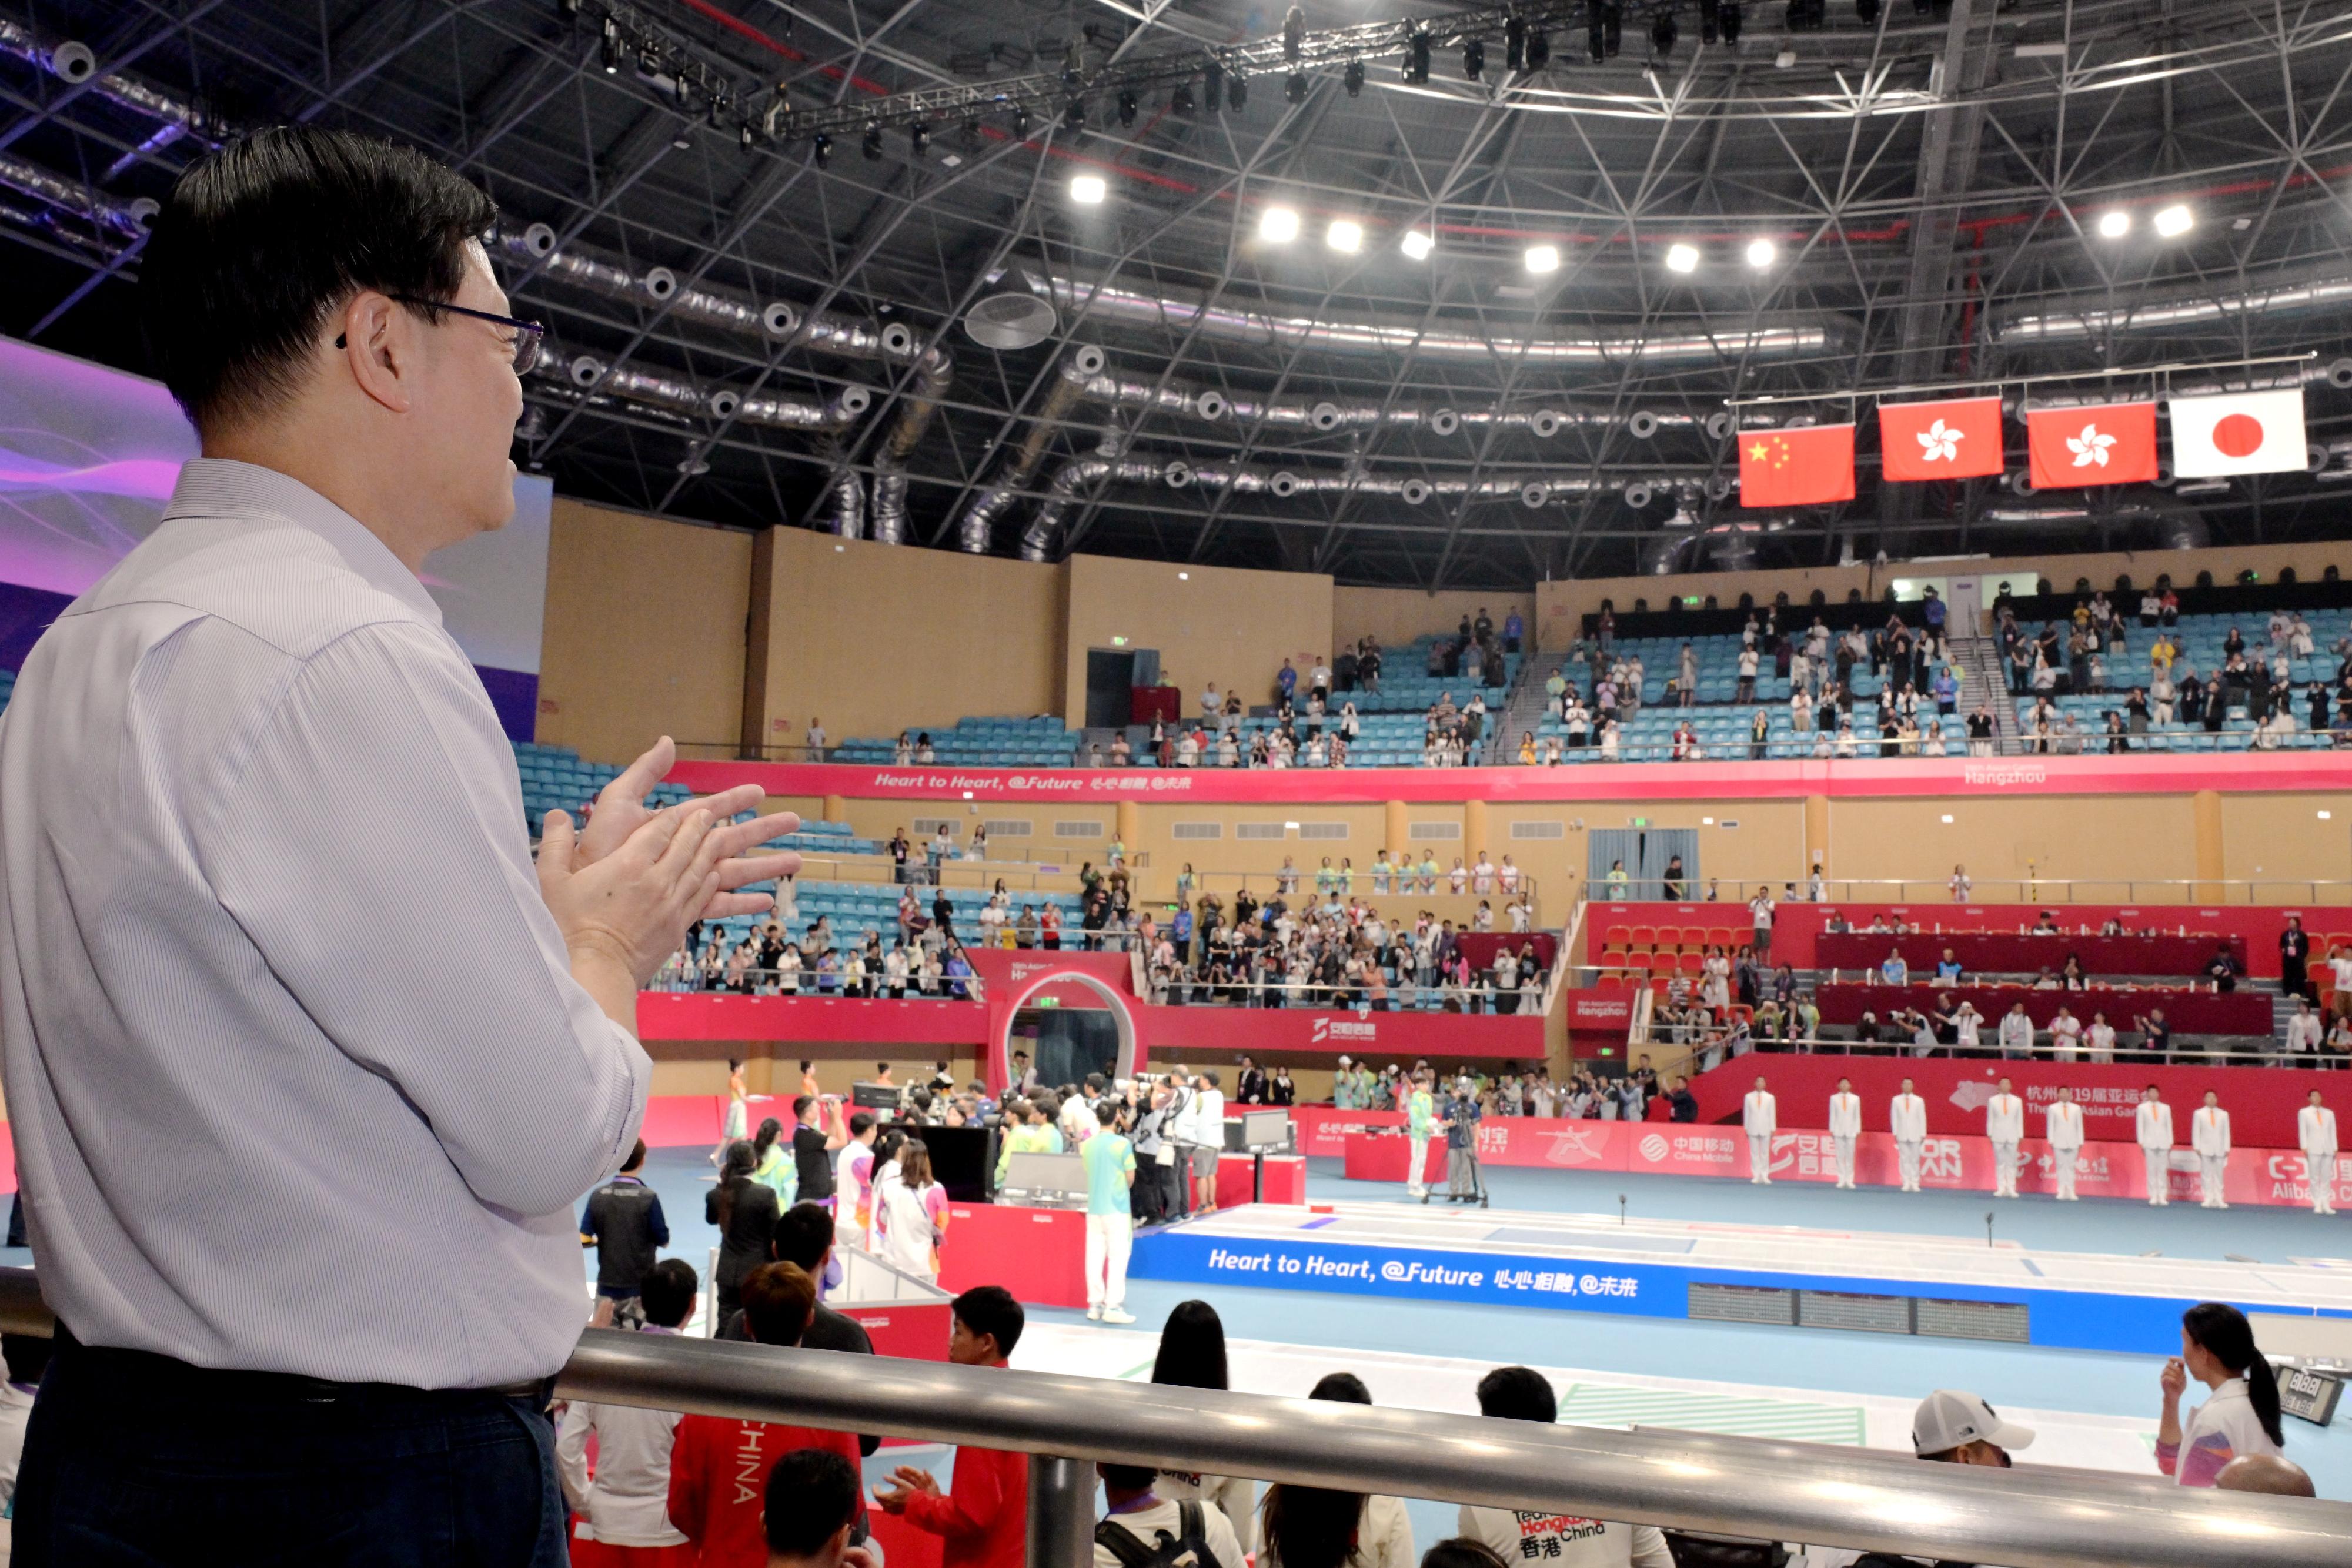 The Chief Executive, Mr John Lee, led a Hong Kong Special Administrative Region Government delegation to Hangzhou and continued his visit programme on September 24. Photo shows Mr Lee at the flag raising ceremony of the Victory Ceremony of the Men's Foil Individual at the 19th Asian Games Hangzhou.